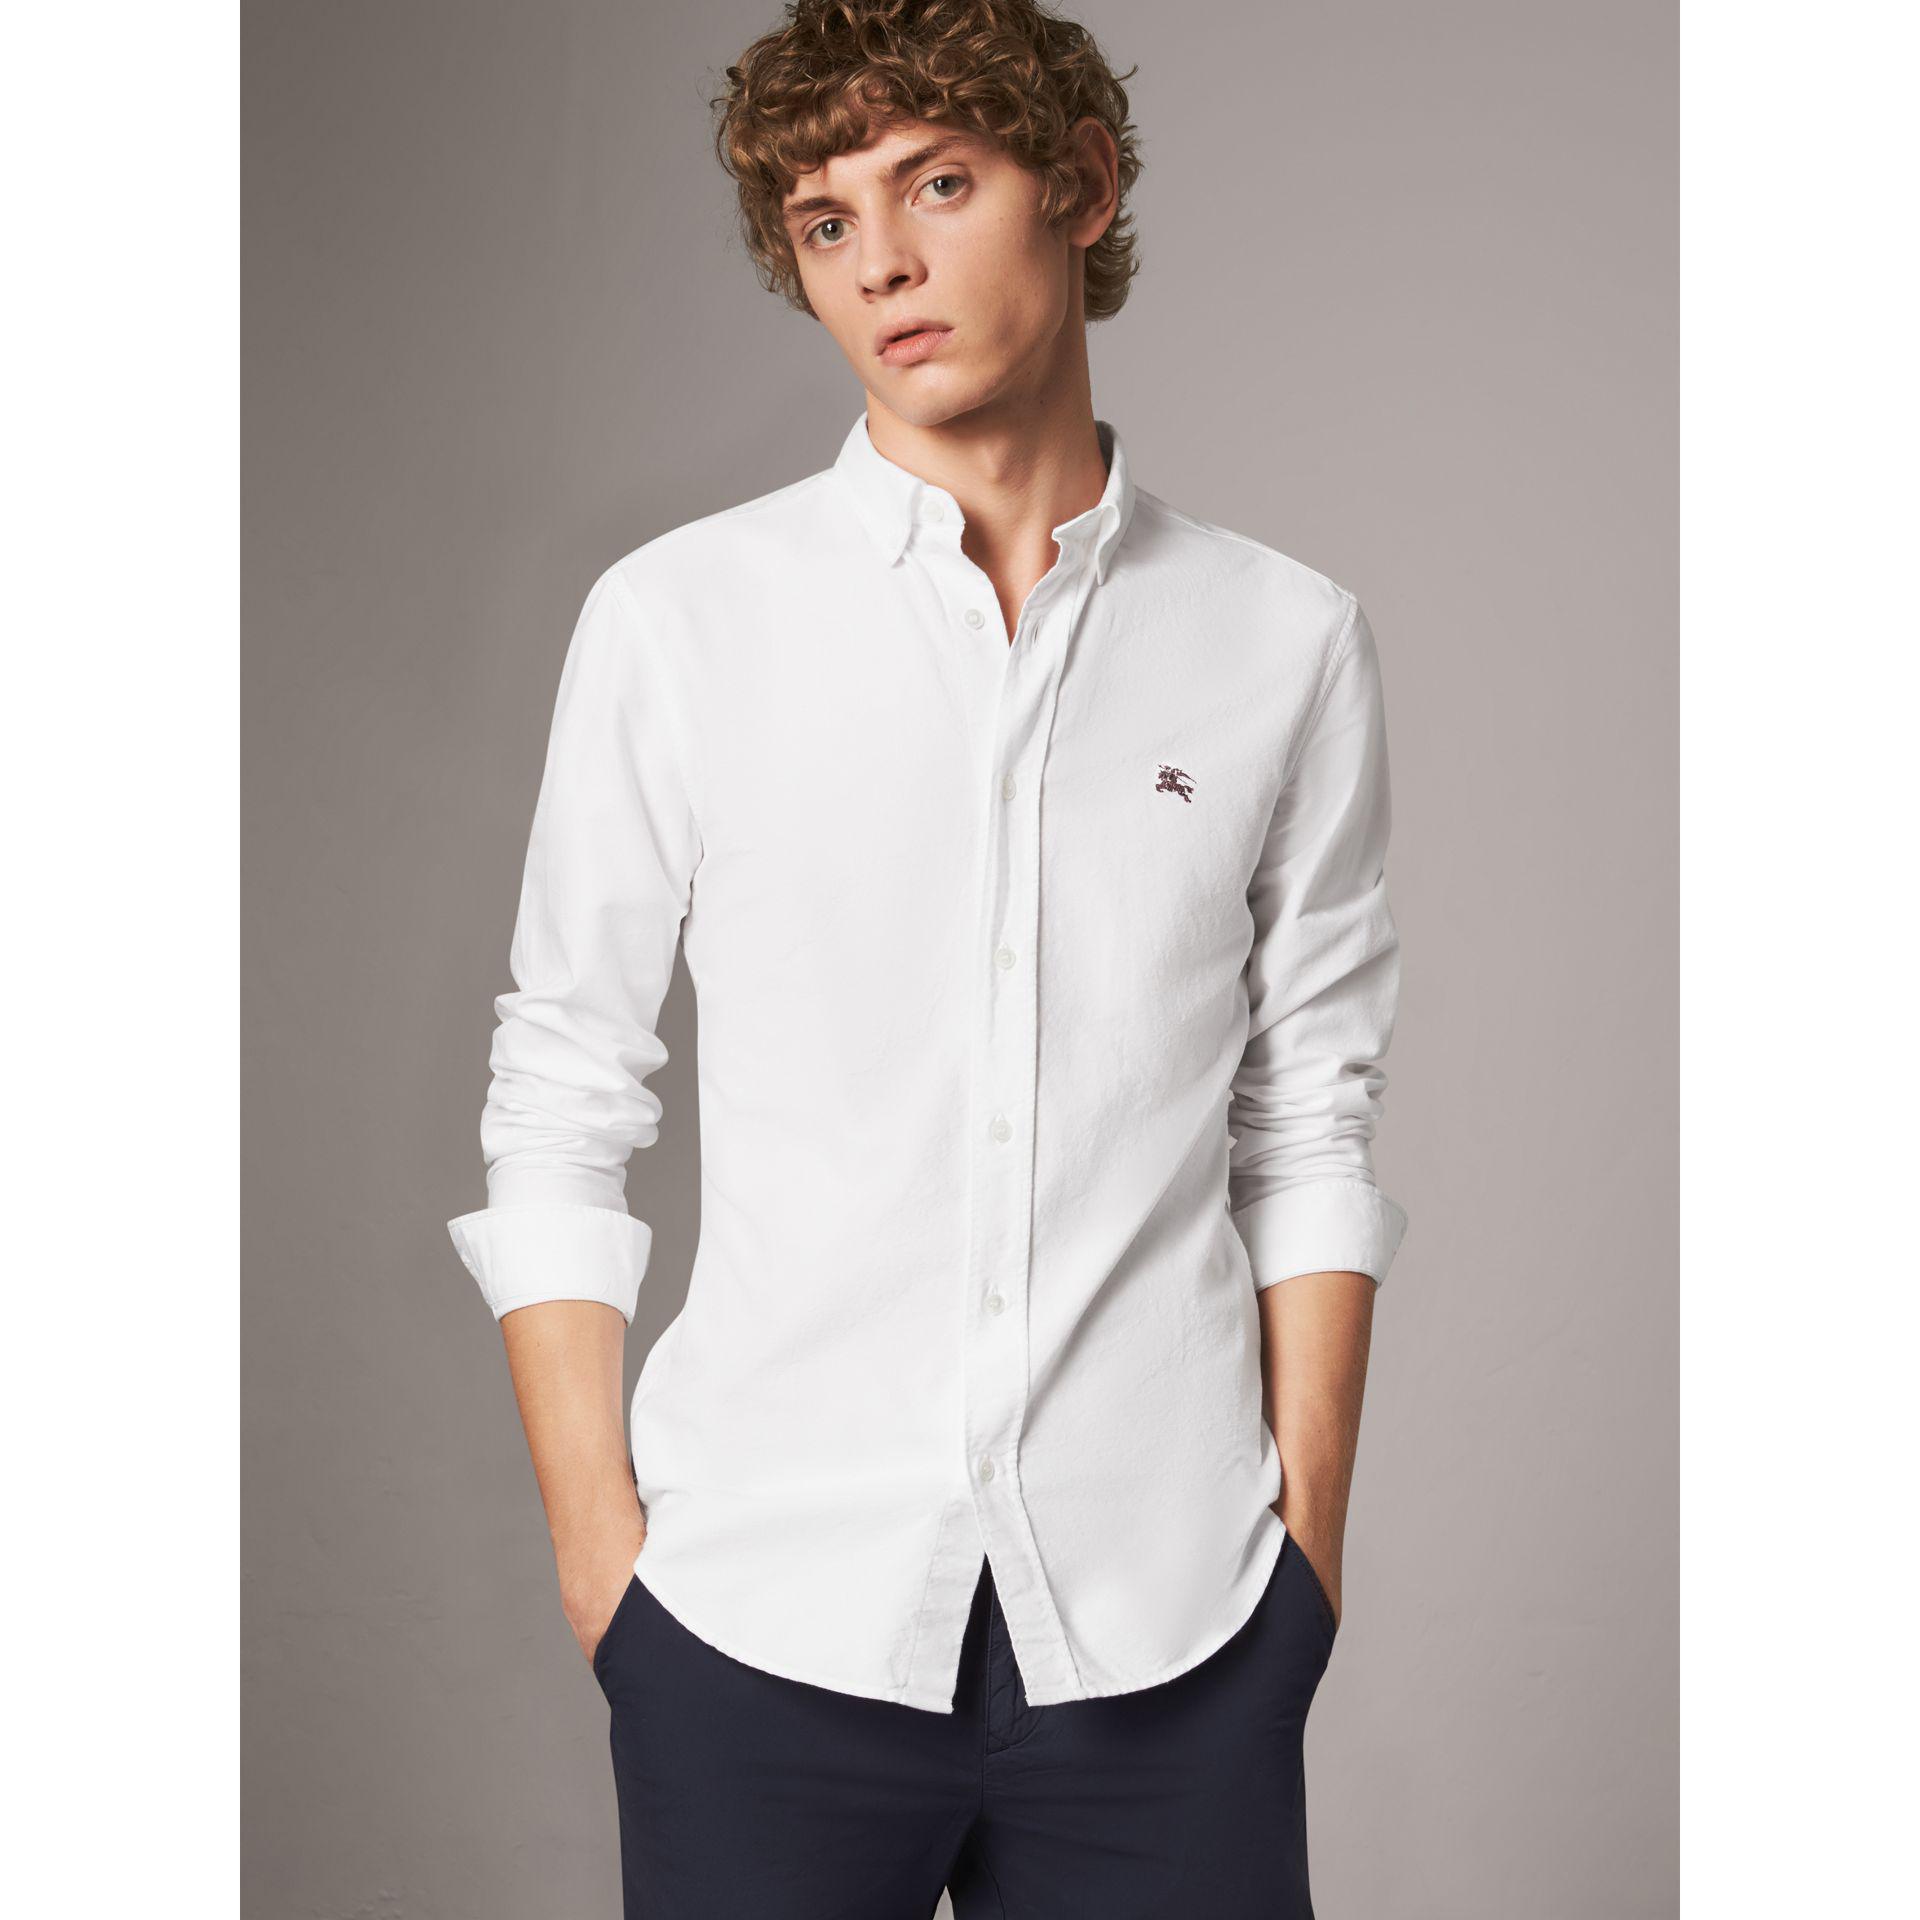 Lyst - Burberry Cotton Oxford Shirt White in Black for Men